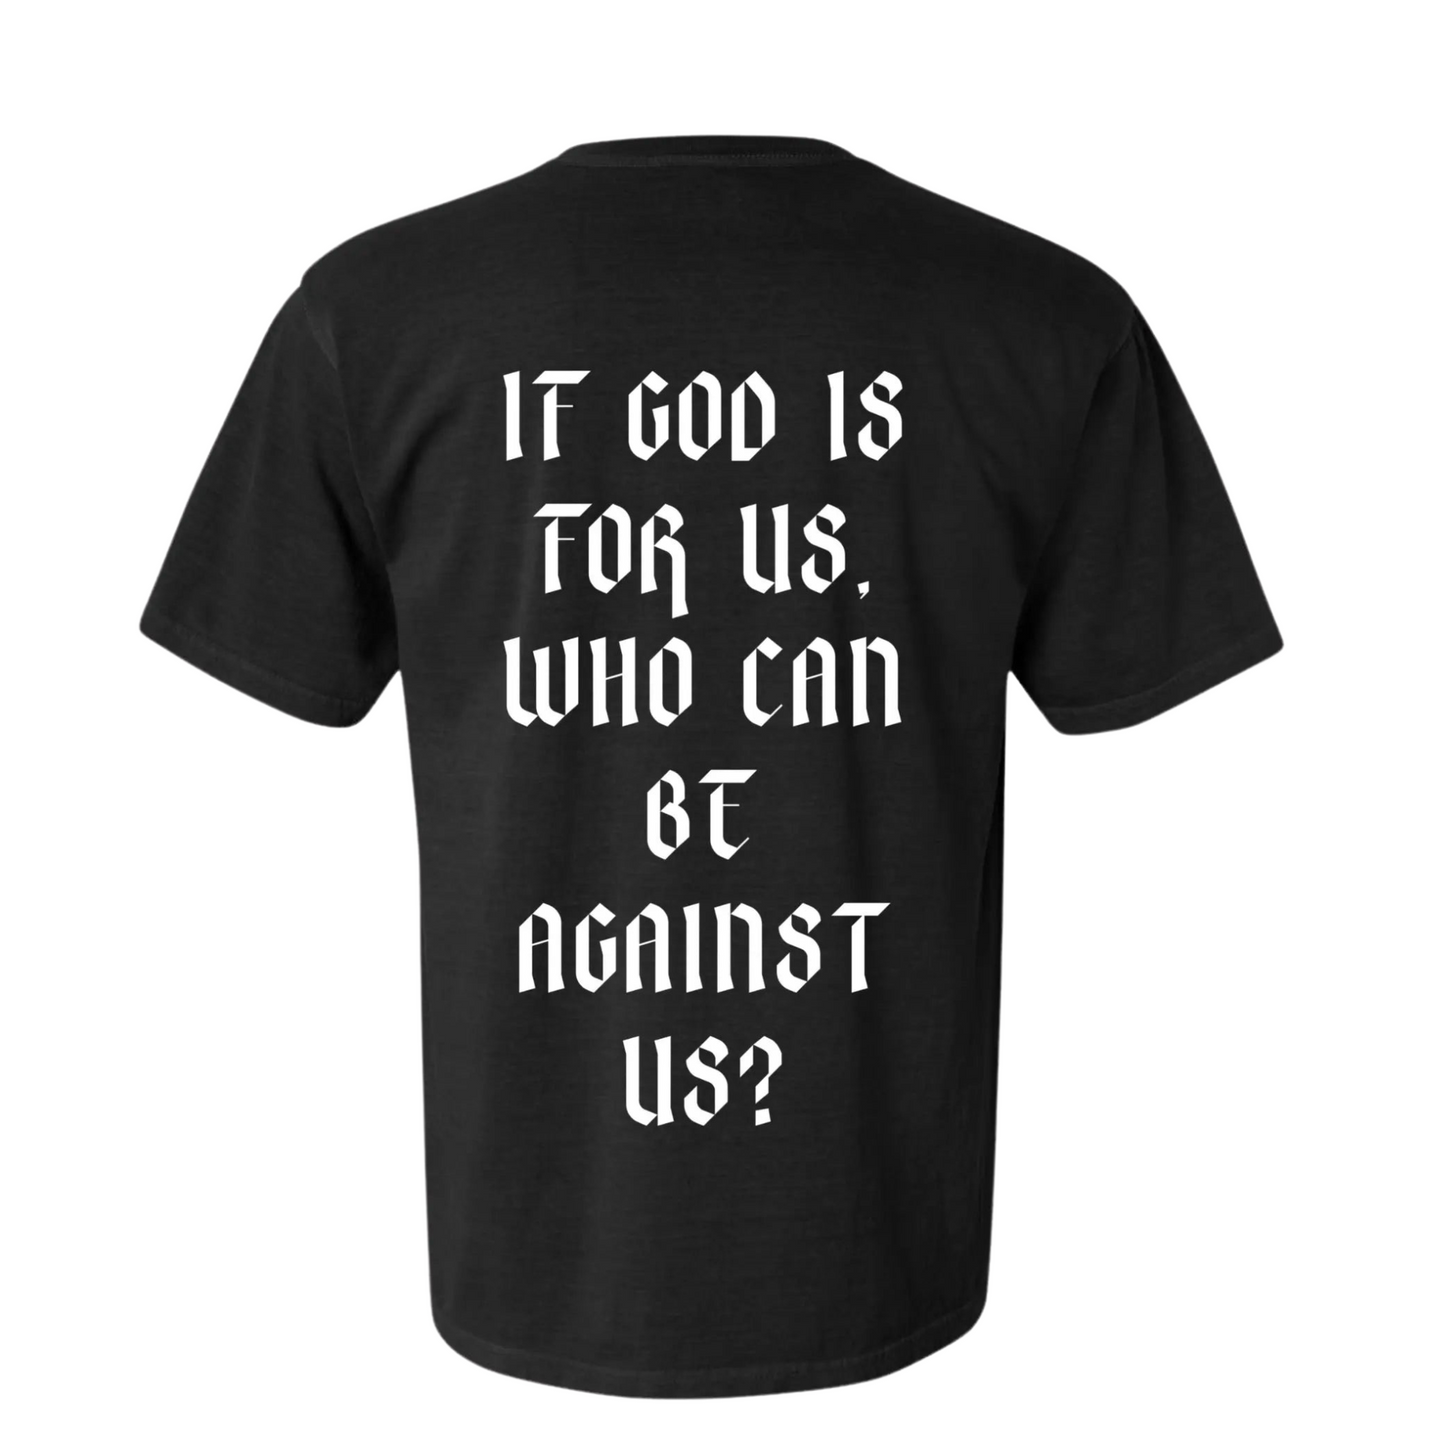 Romans 8:31 Black Tshirt. If God is for us who can be against us is written in bold white letters on the front of the black Heavyweight t-shirt. black Tshirt, christian clothing, faith based apparel Righteous sweatshirt. Jesus inspired clothing. Oversized Tshirt. loungewear. streetwear. Christian streetwear. Crown of Favor